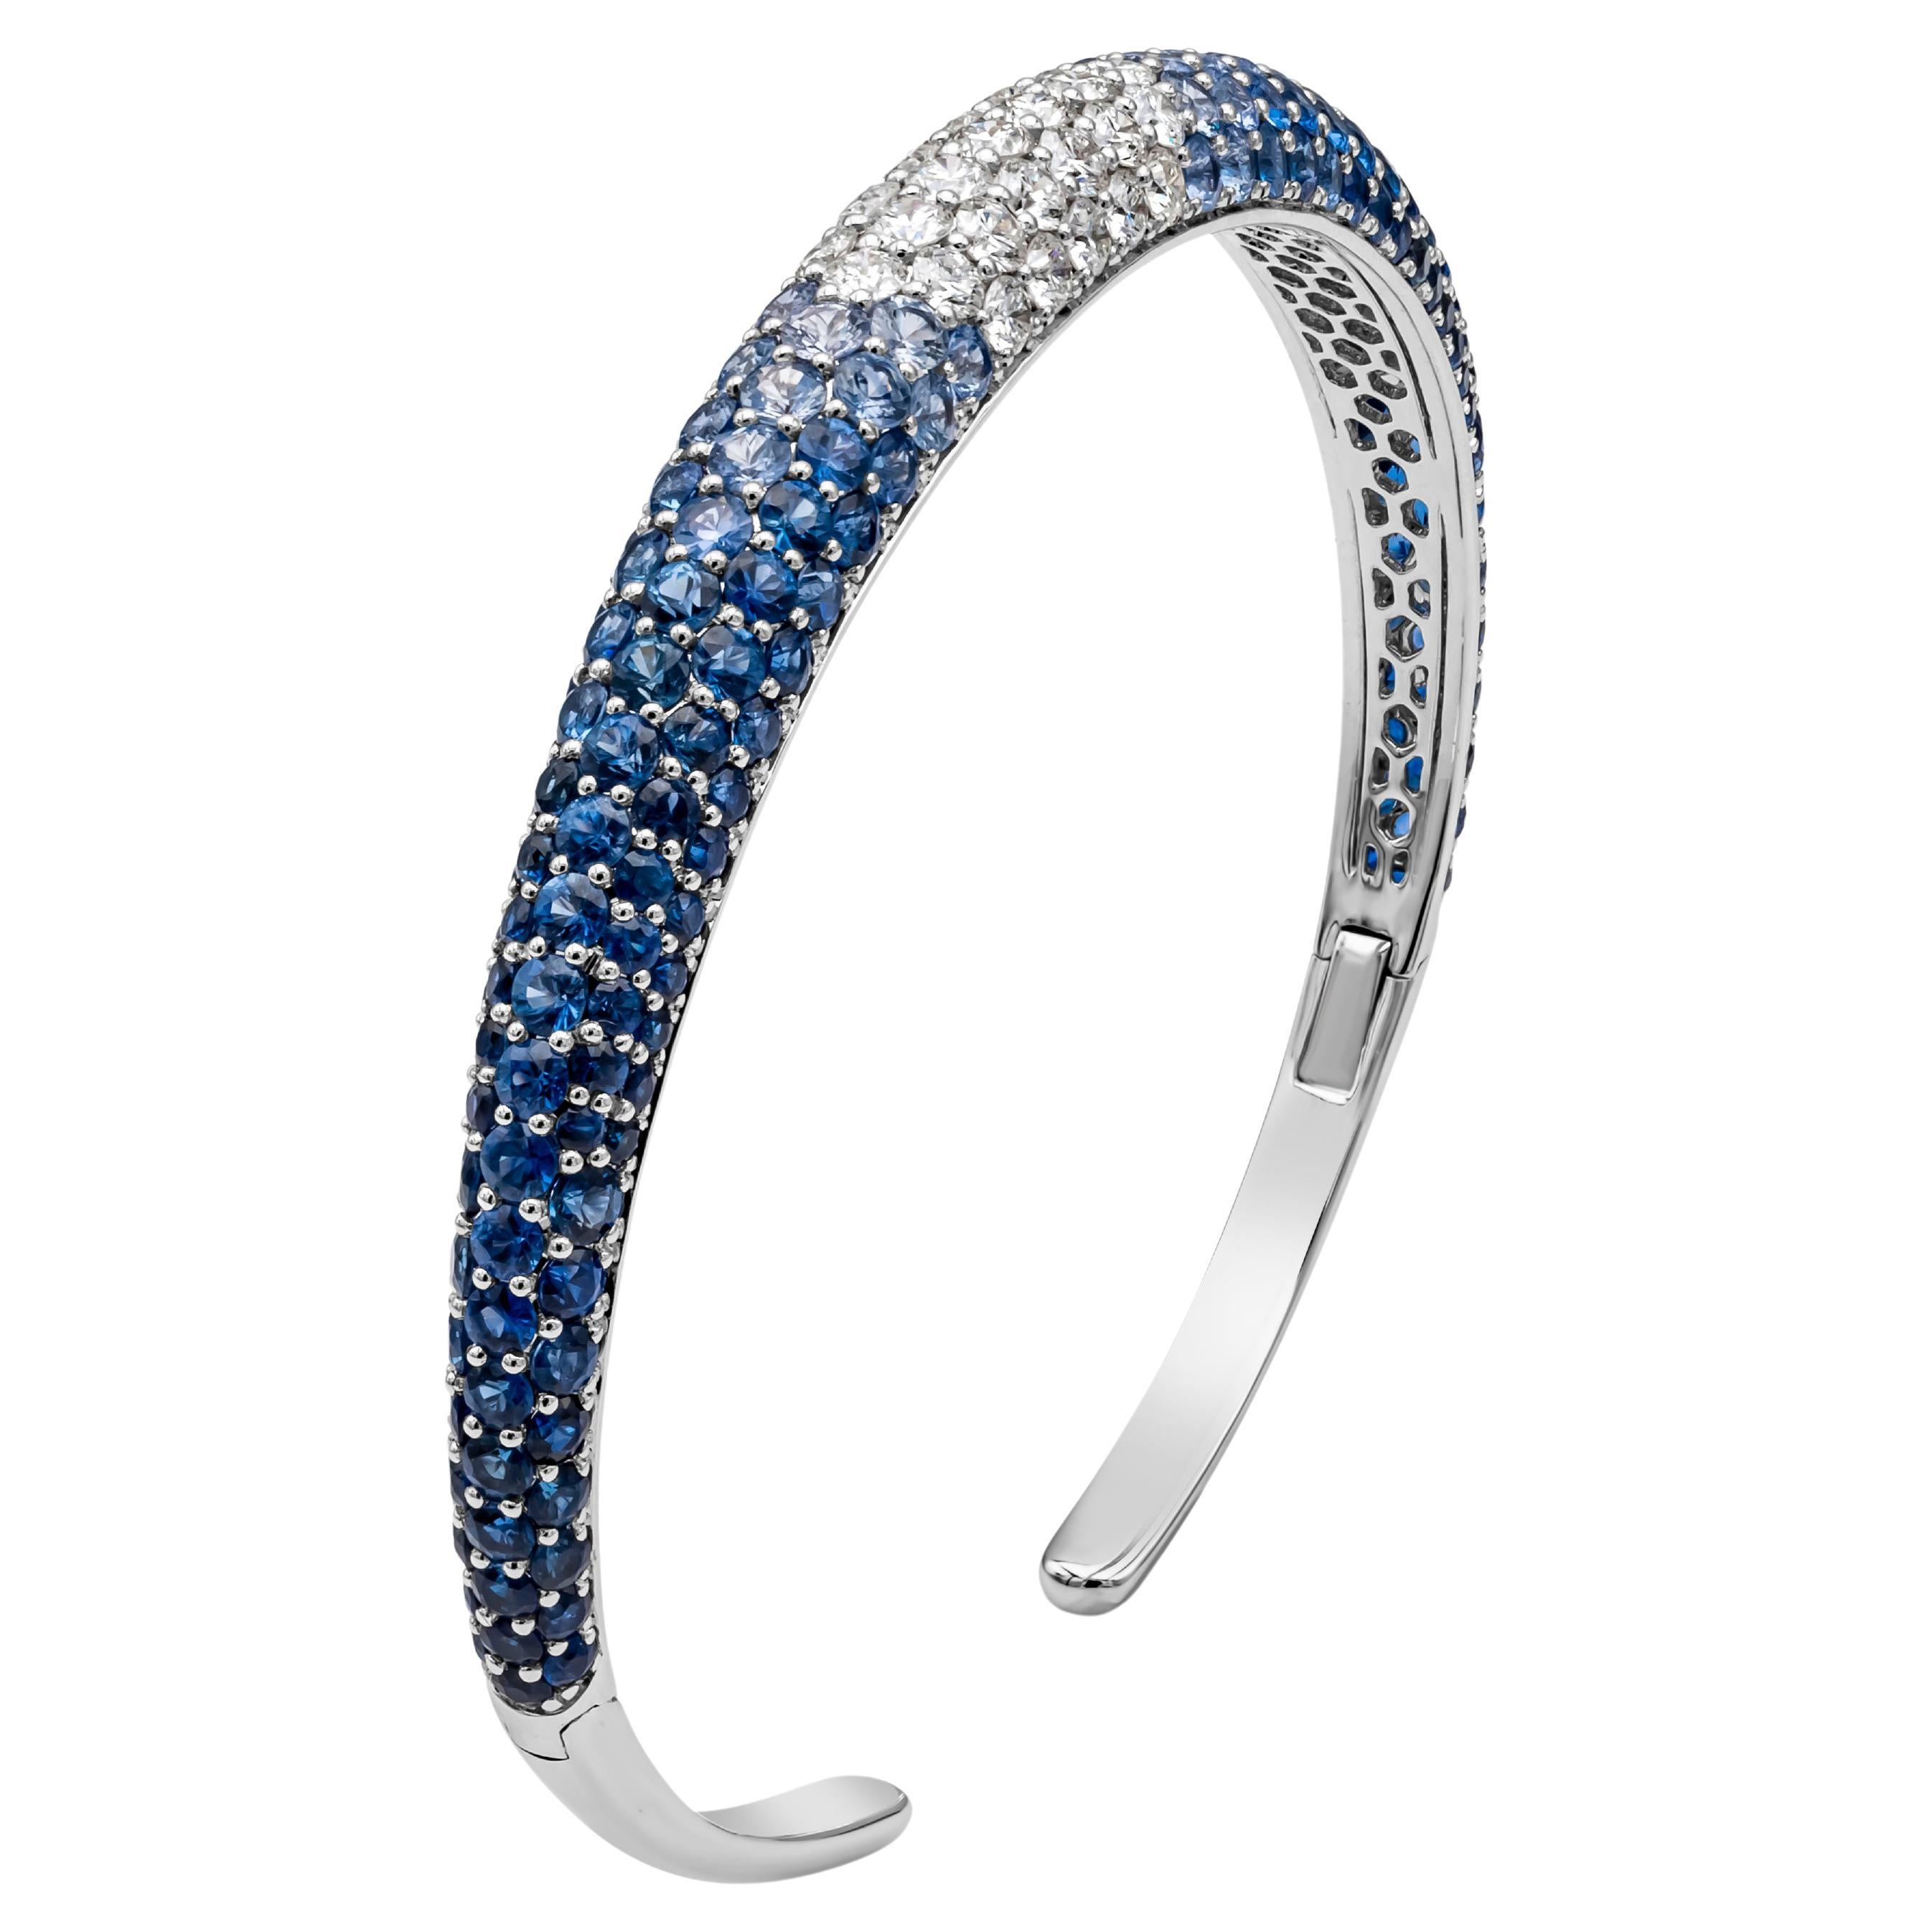 A fashionable and beautiful bangle bracelet, showcasing color-rich round brilliant cut blue sapphires and white diamonds weighing 10.05 carats total. Set on a shared-prong micropavé dome finely made with 18K white gold. Diamonds are approximately